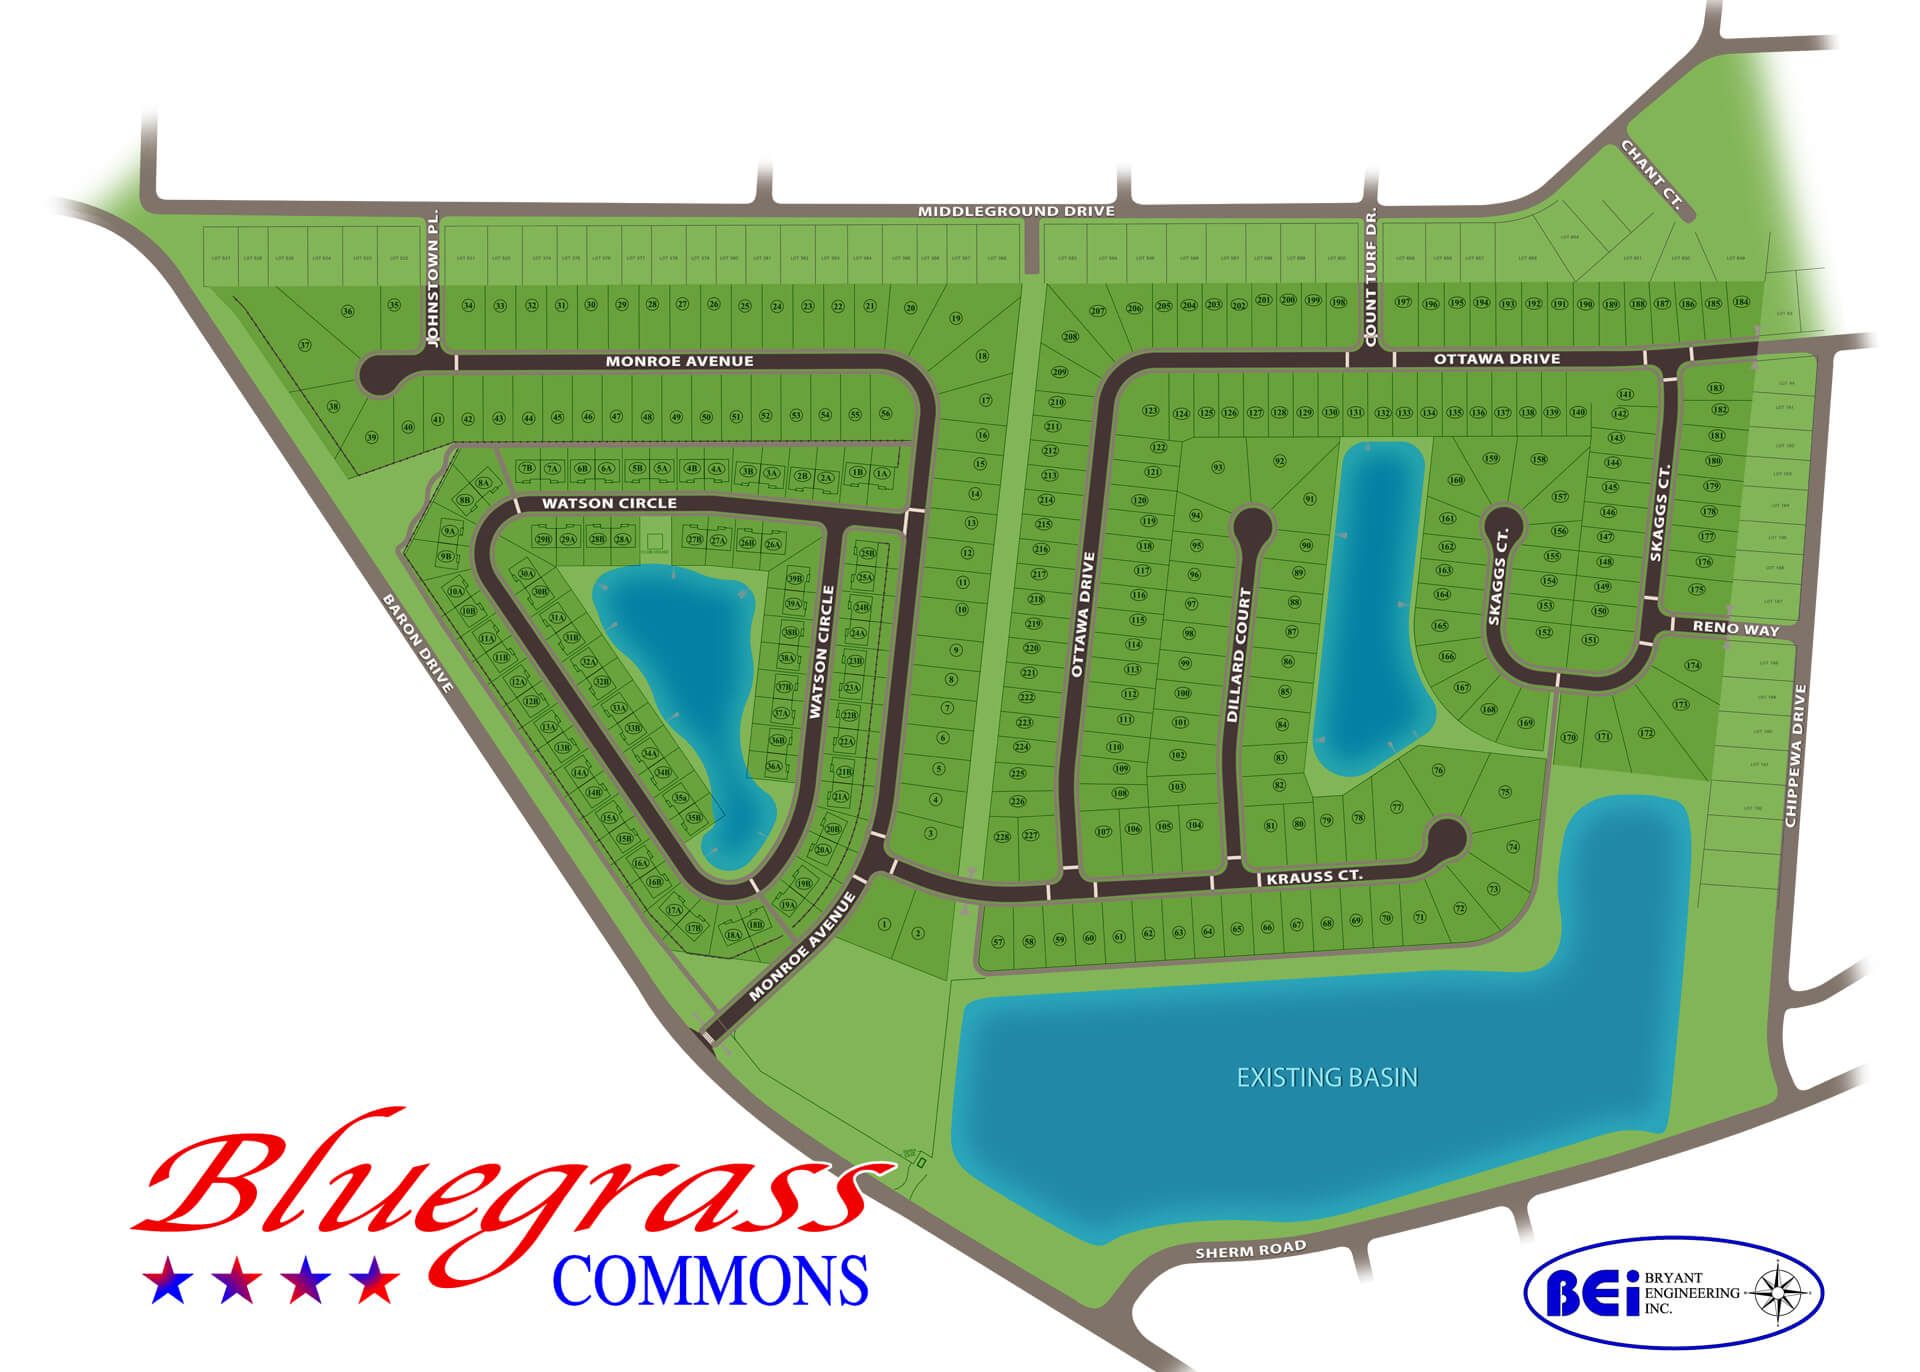 a map of a residential area called bluegrass commons